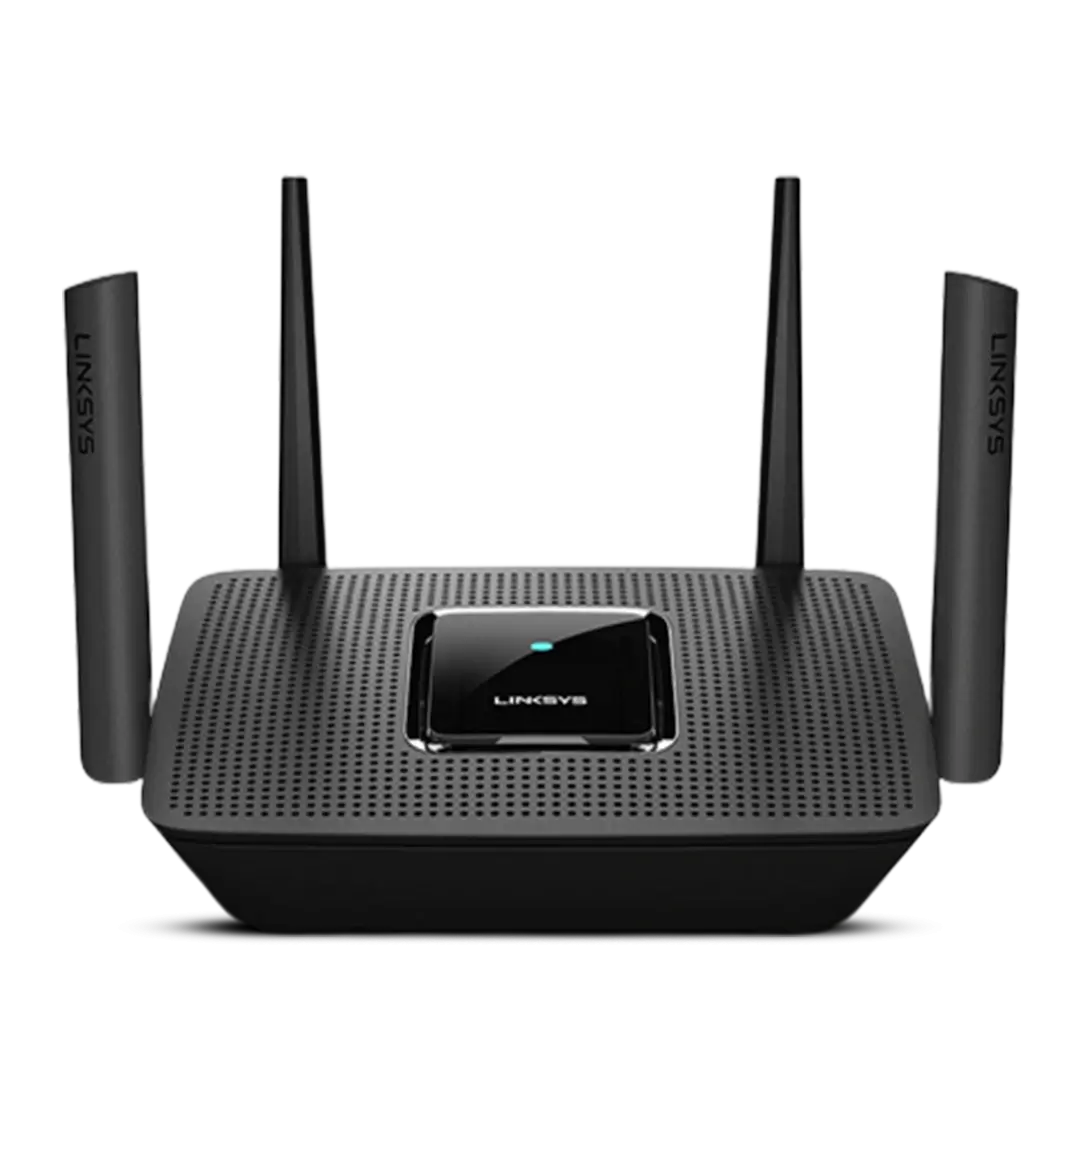 Troubleshooting Myrouter local not working